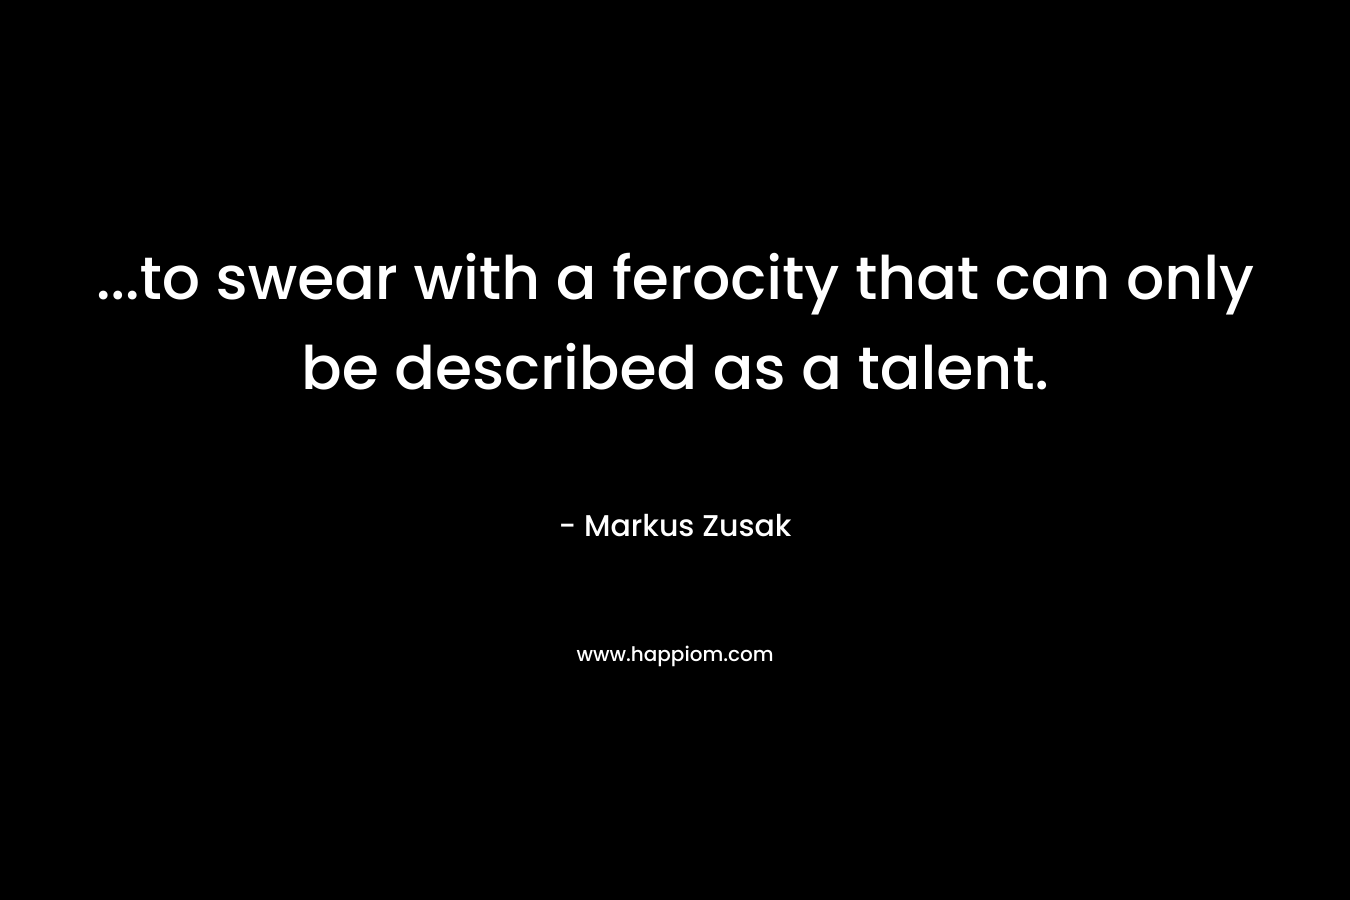 …to swear with a ferocity that can only be described as a talent. – Markus Zusak